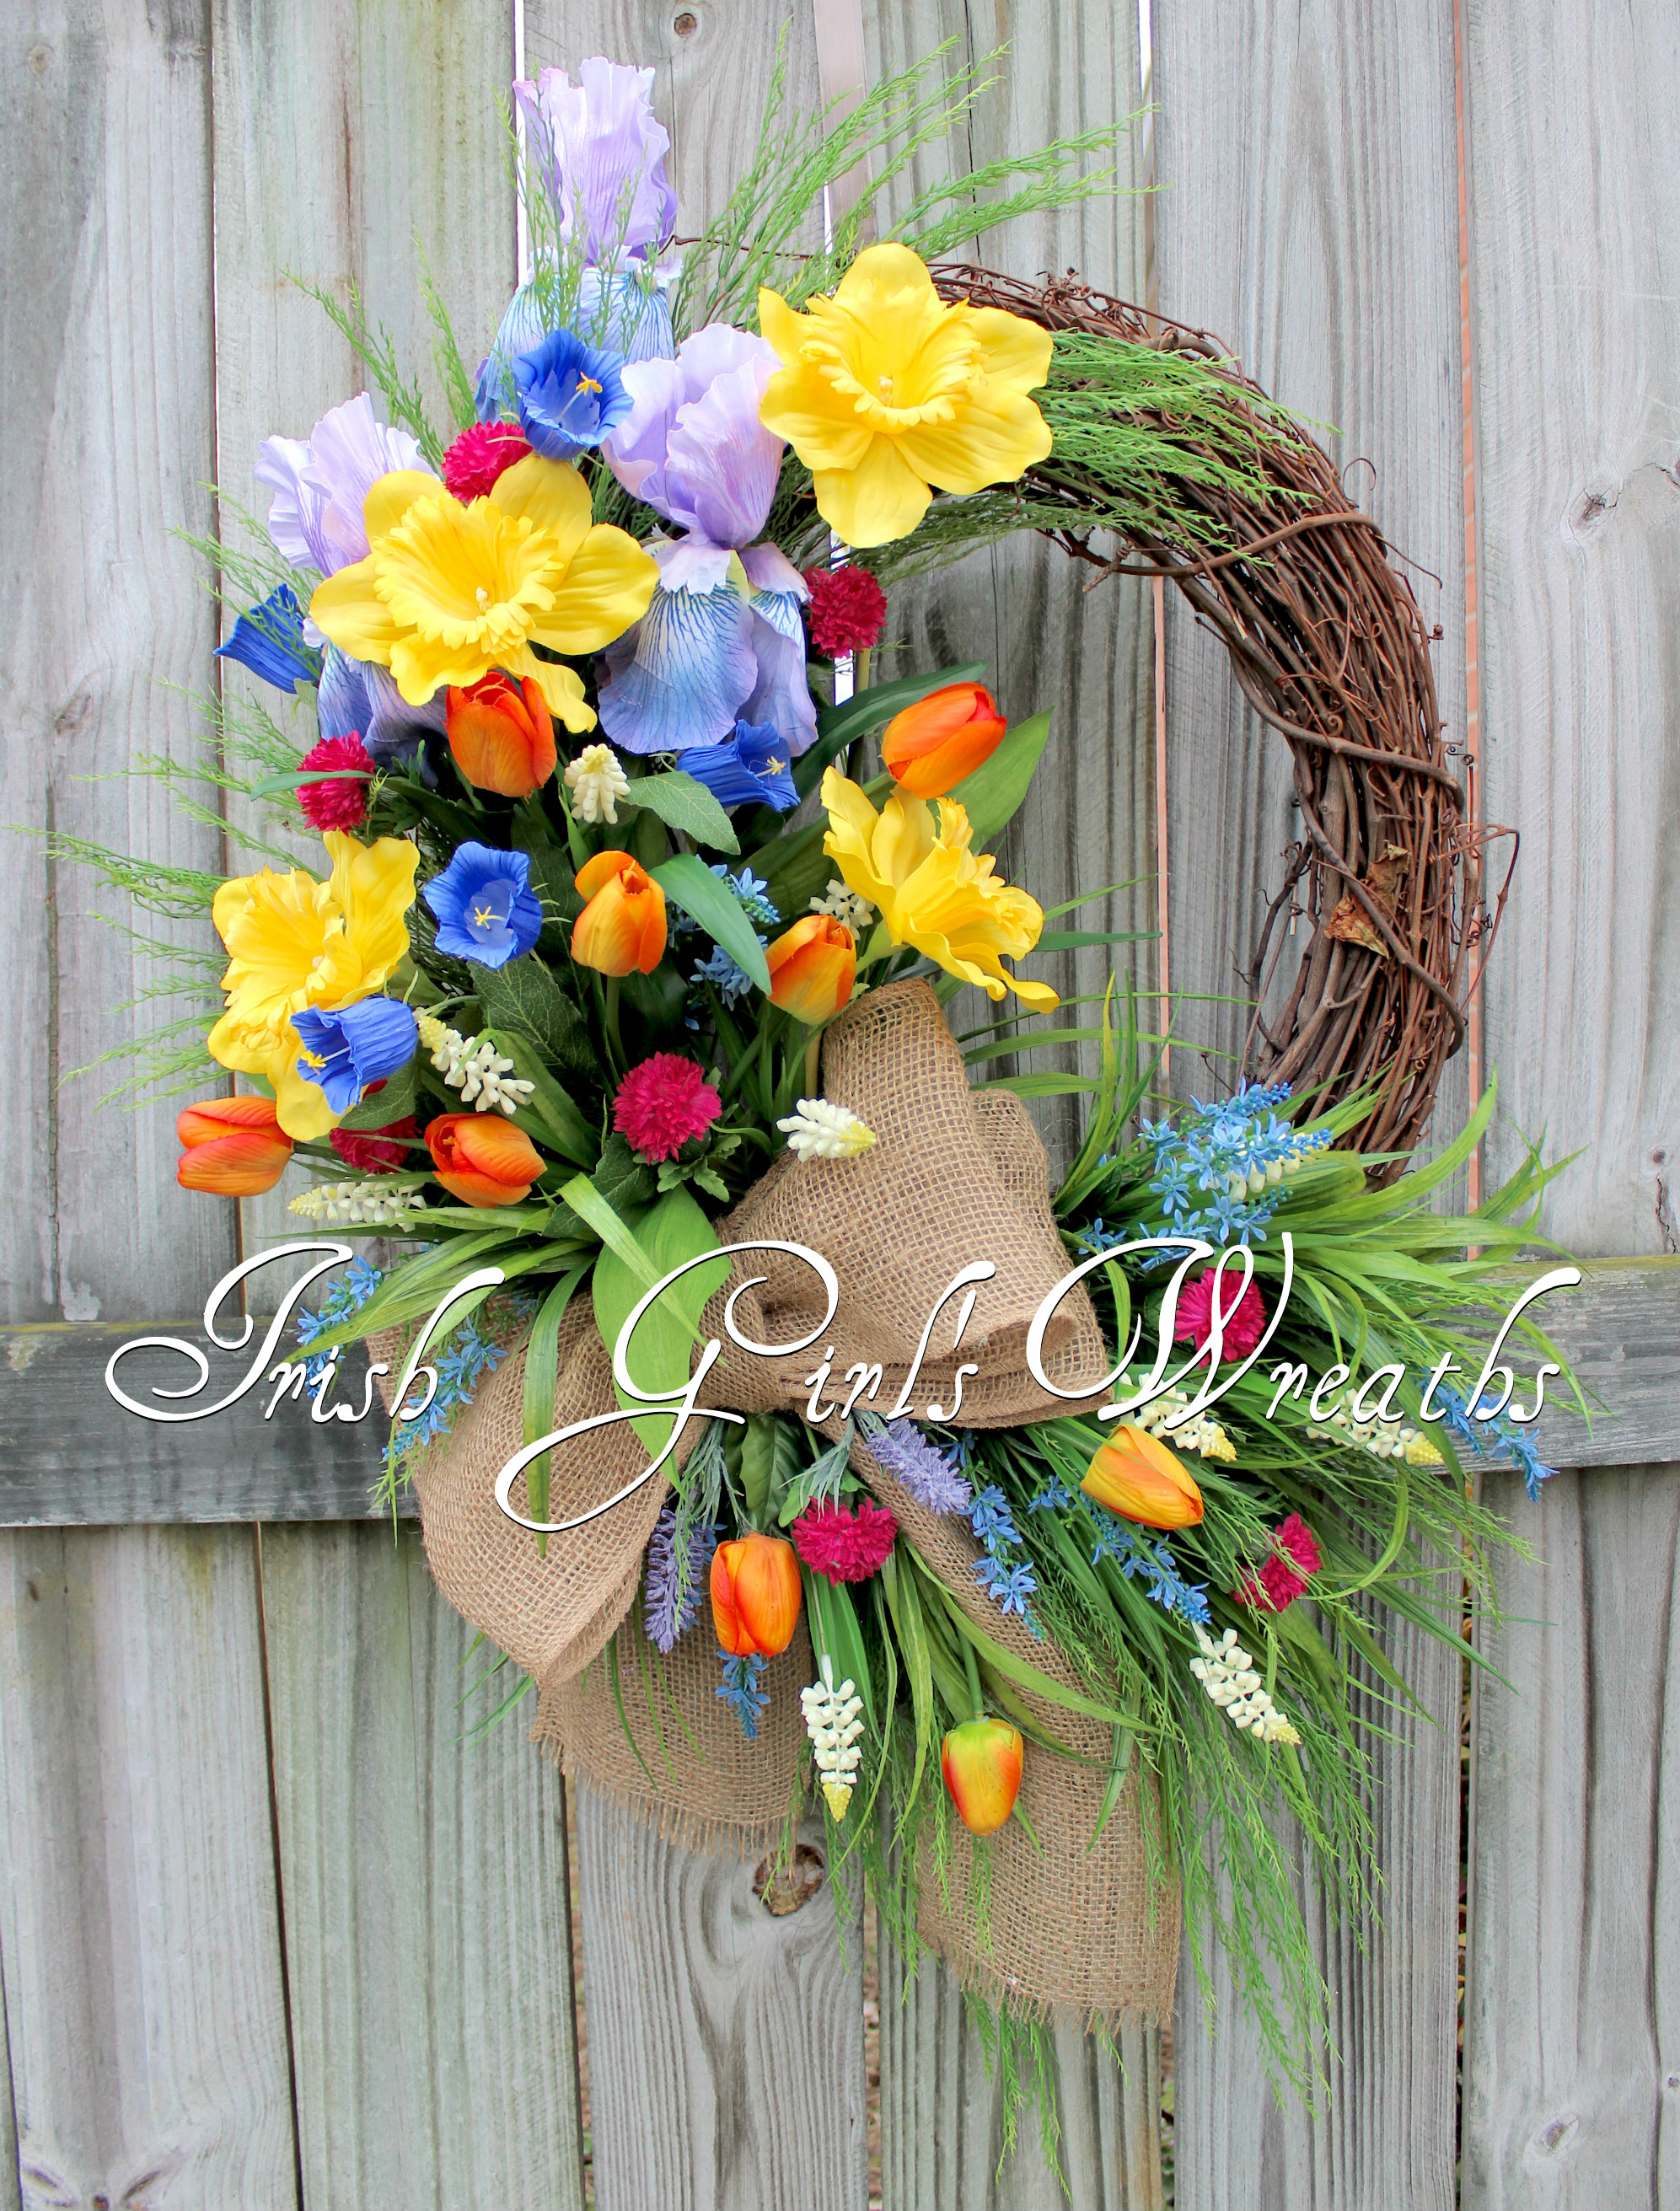 Purple Iris & Daffodil Spring Garden Wreath, Real touch Tulips Bellflowers clover Country Floral Wreath, large Mothers Day Floral Wreath